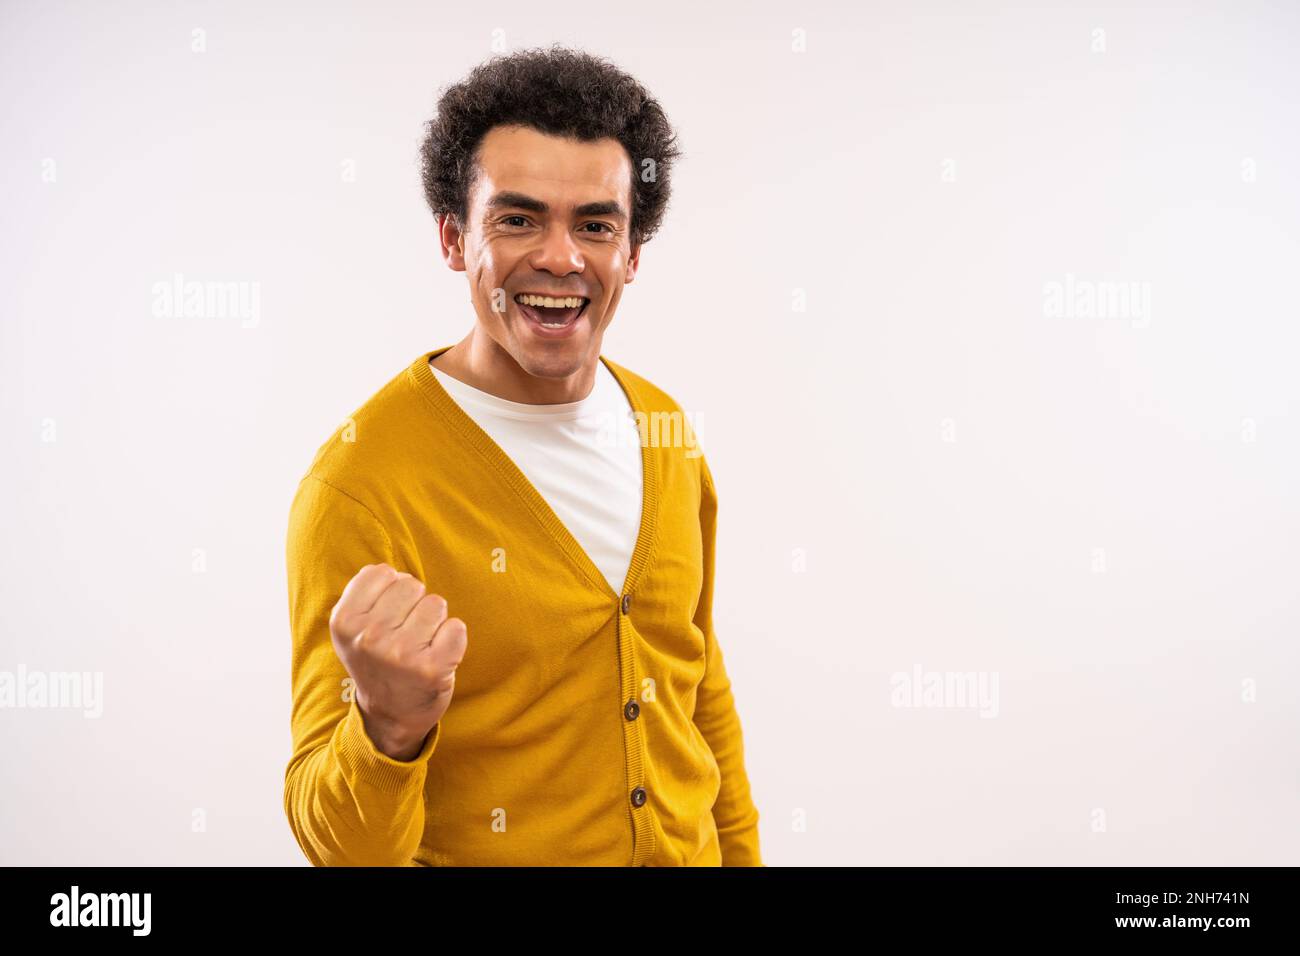 Studio shot portrait of excited smiling multiracial man. Stock Photo